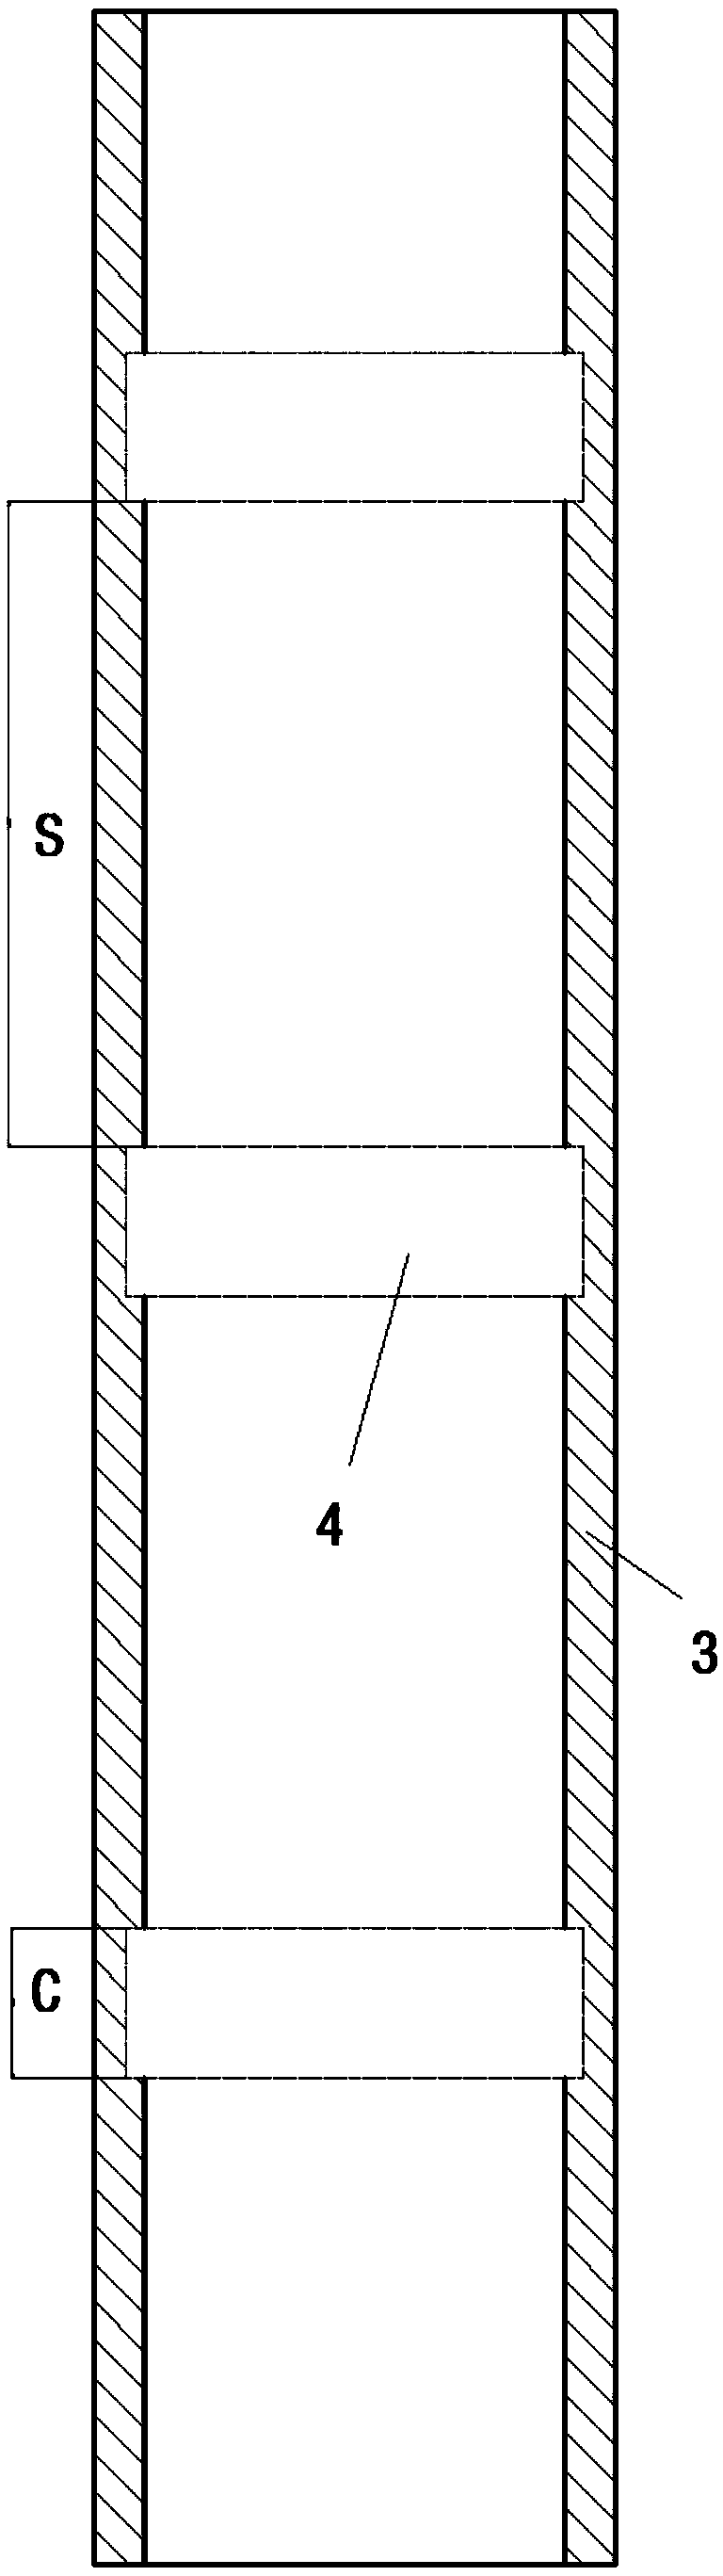 Loop Heat Pipe with Annular Divider with Varying Hydraulic Diameter